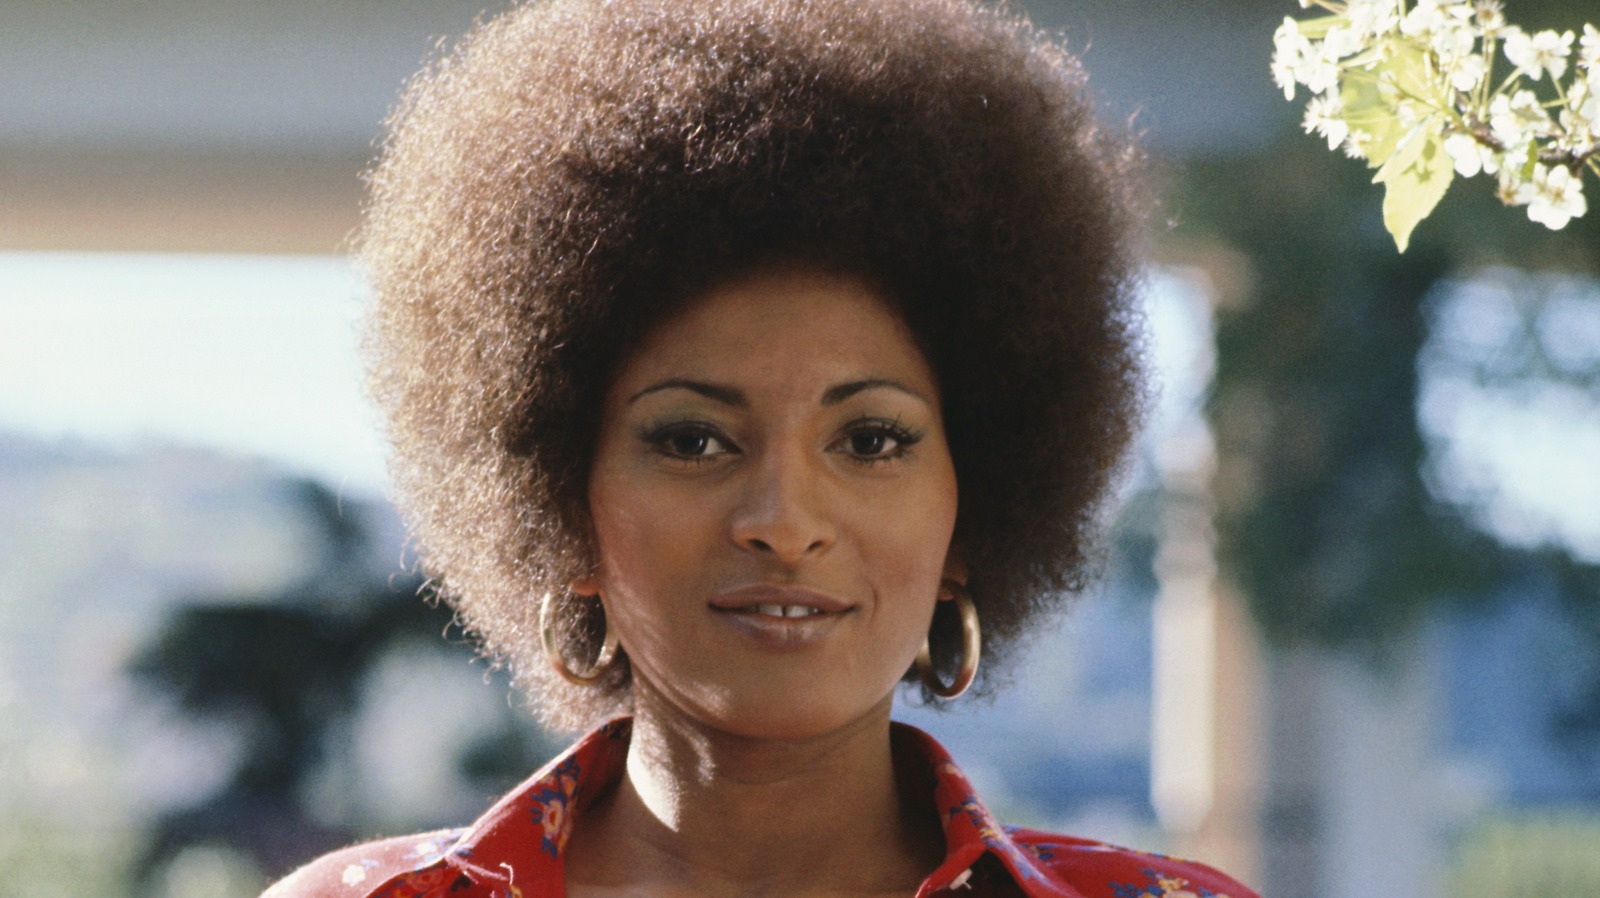 70s Hairstyles Styling Tips For Halloween Costumes